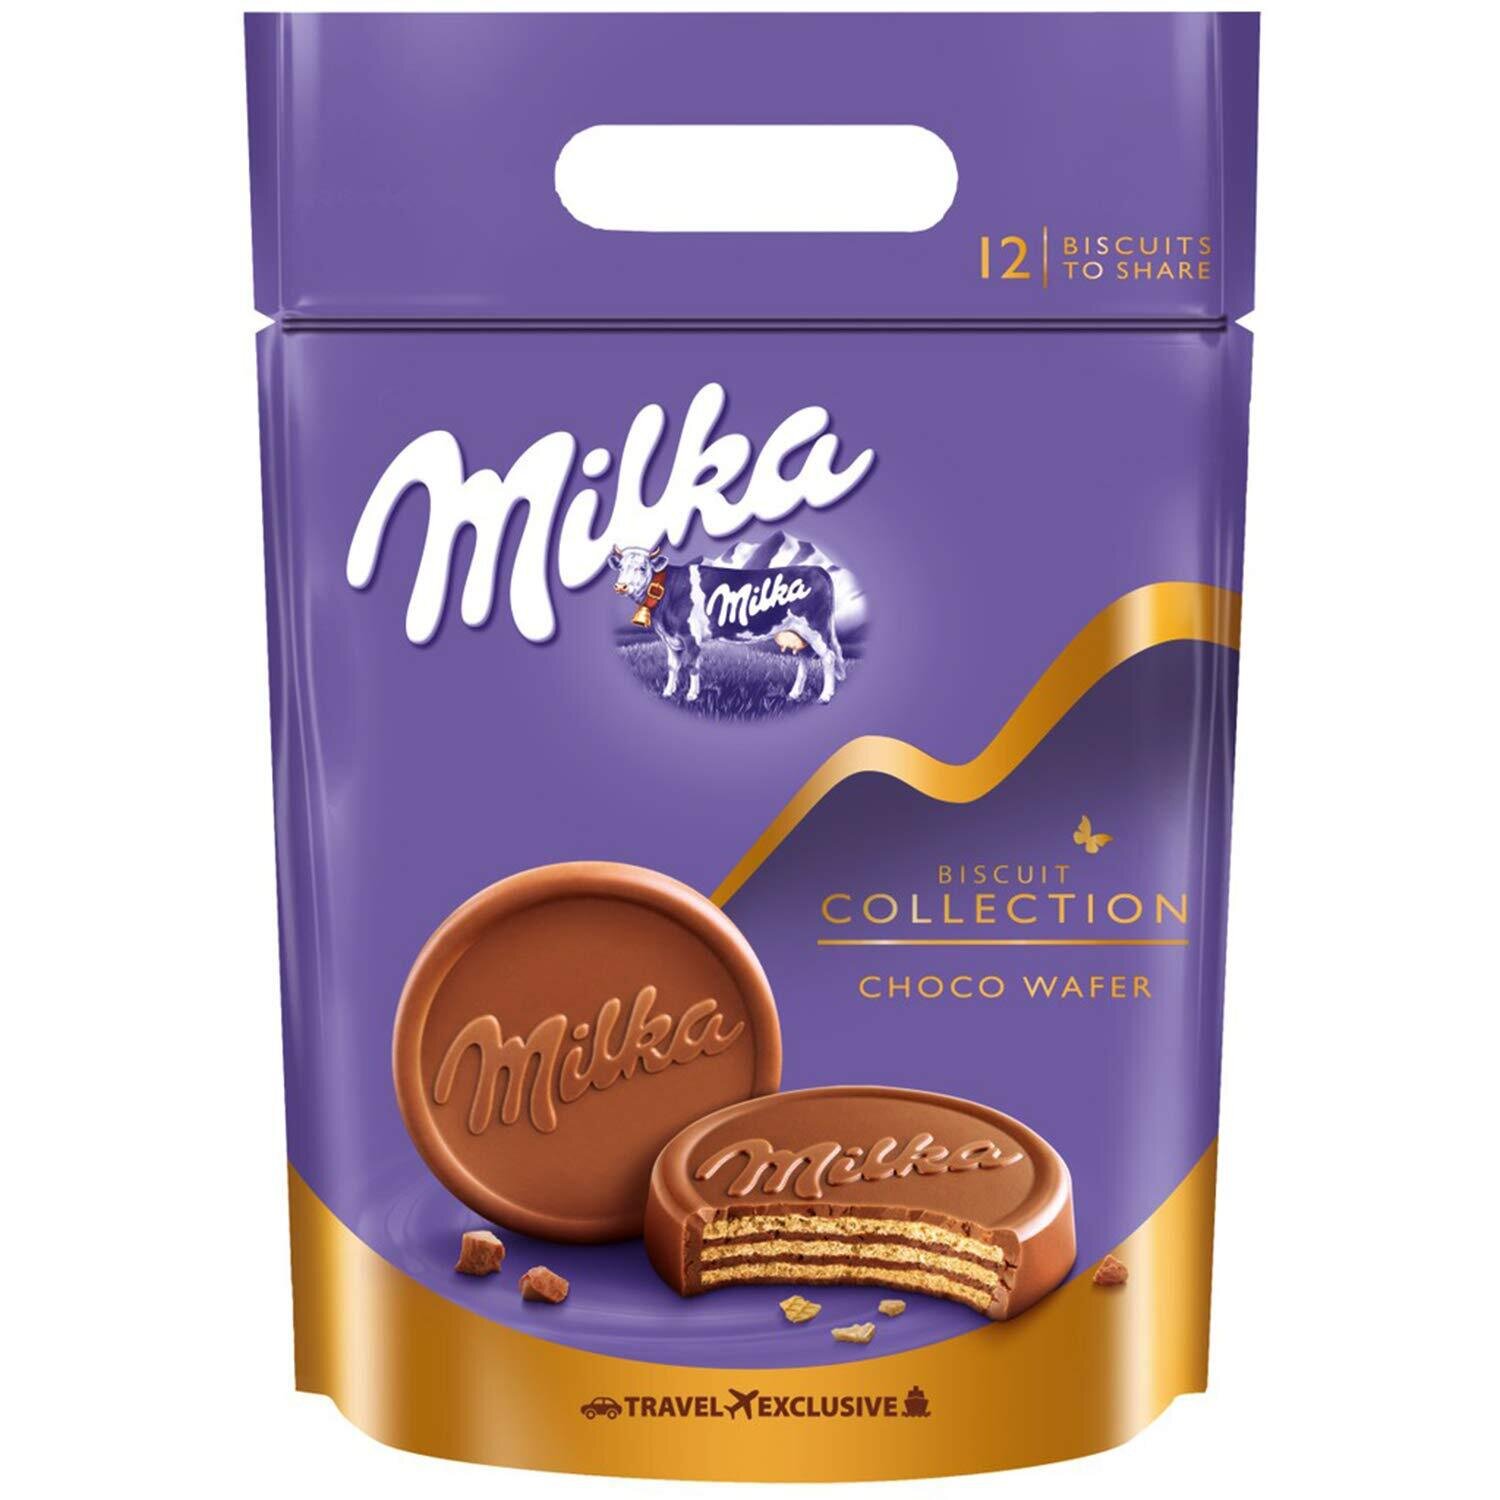 Milka Choco Wafer Biscuits Collection (12Pcs) 360G | Melt-Free Packing